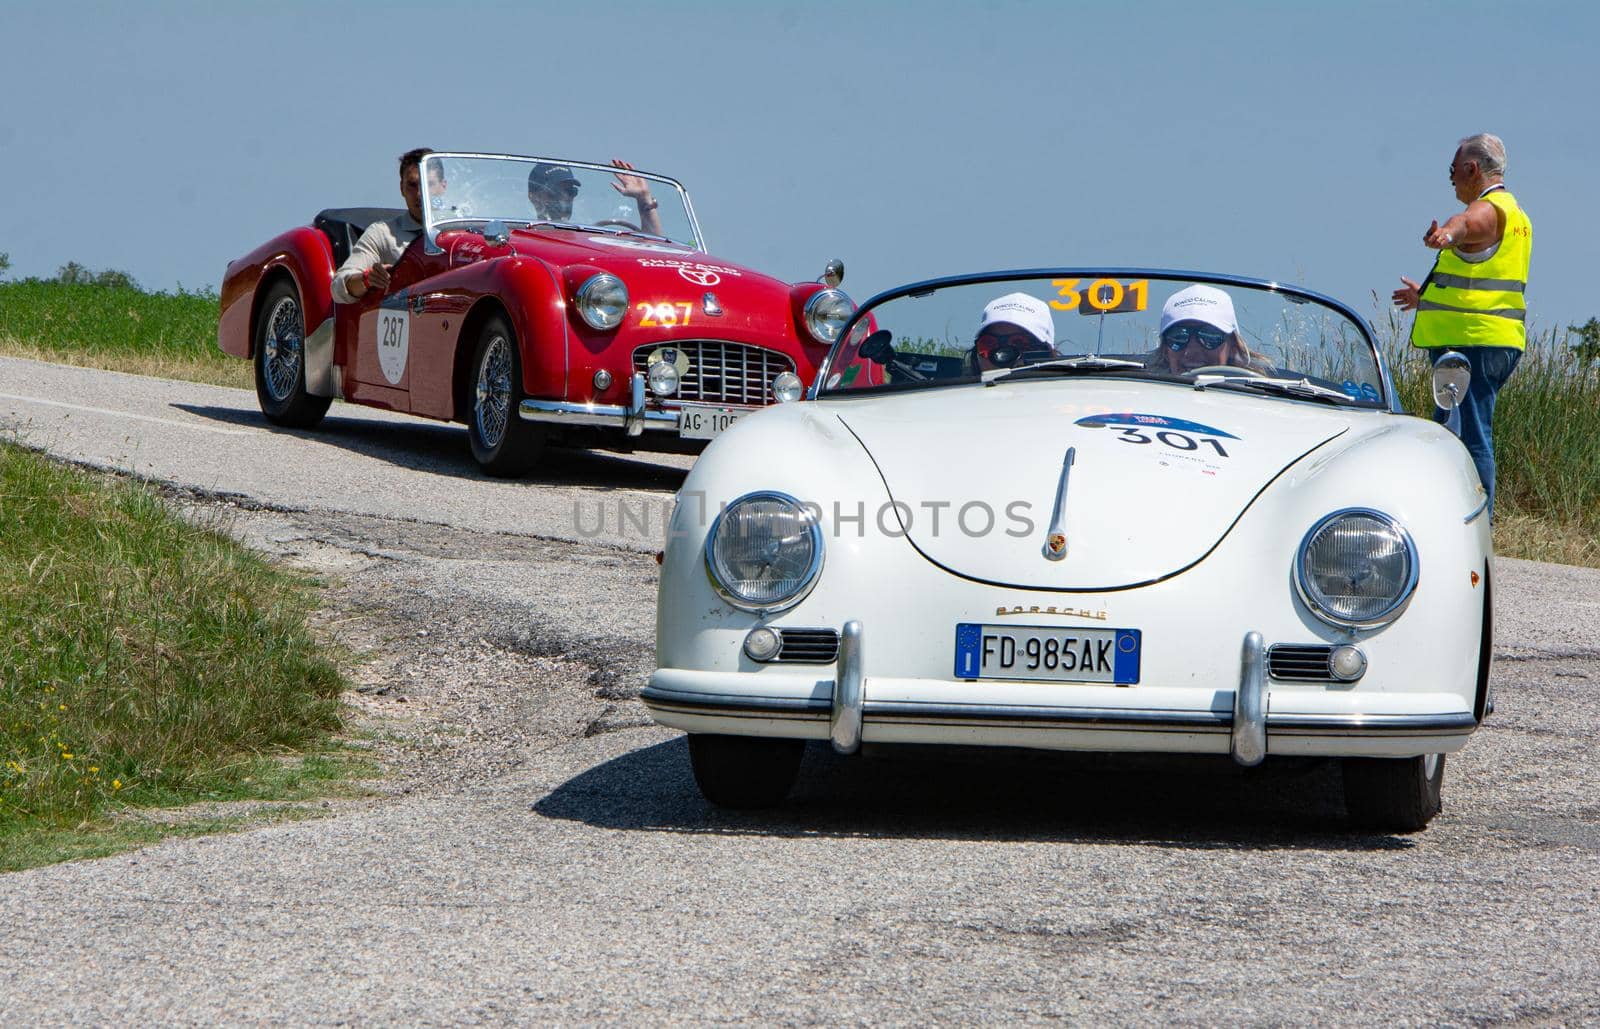 PORSCHE 356 1500 SPEEDSTER 1954 on an old racing car in rally Mille Miglia 2022 the famous italian historical race (1927-1957 by massimocampanari